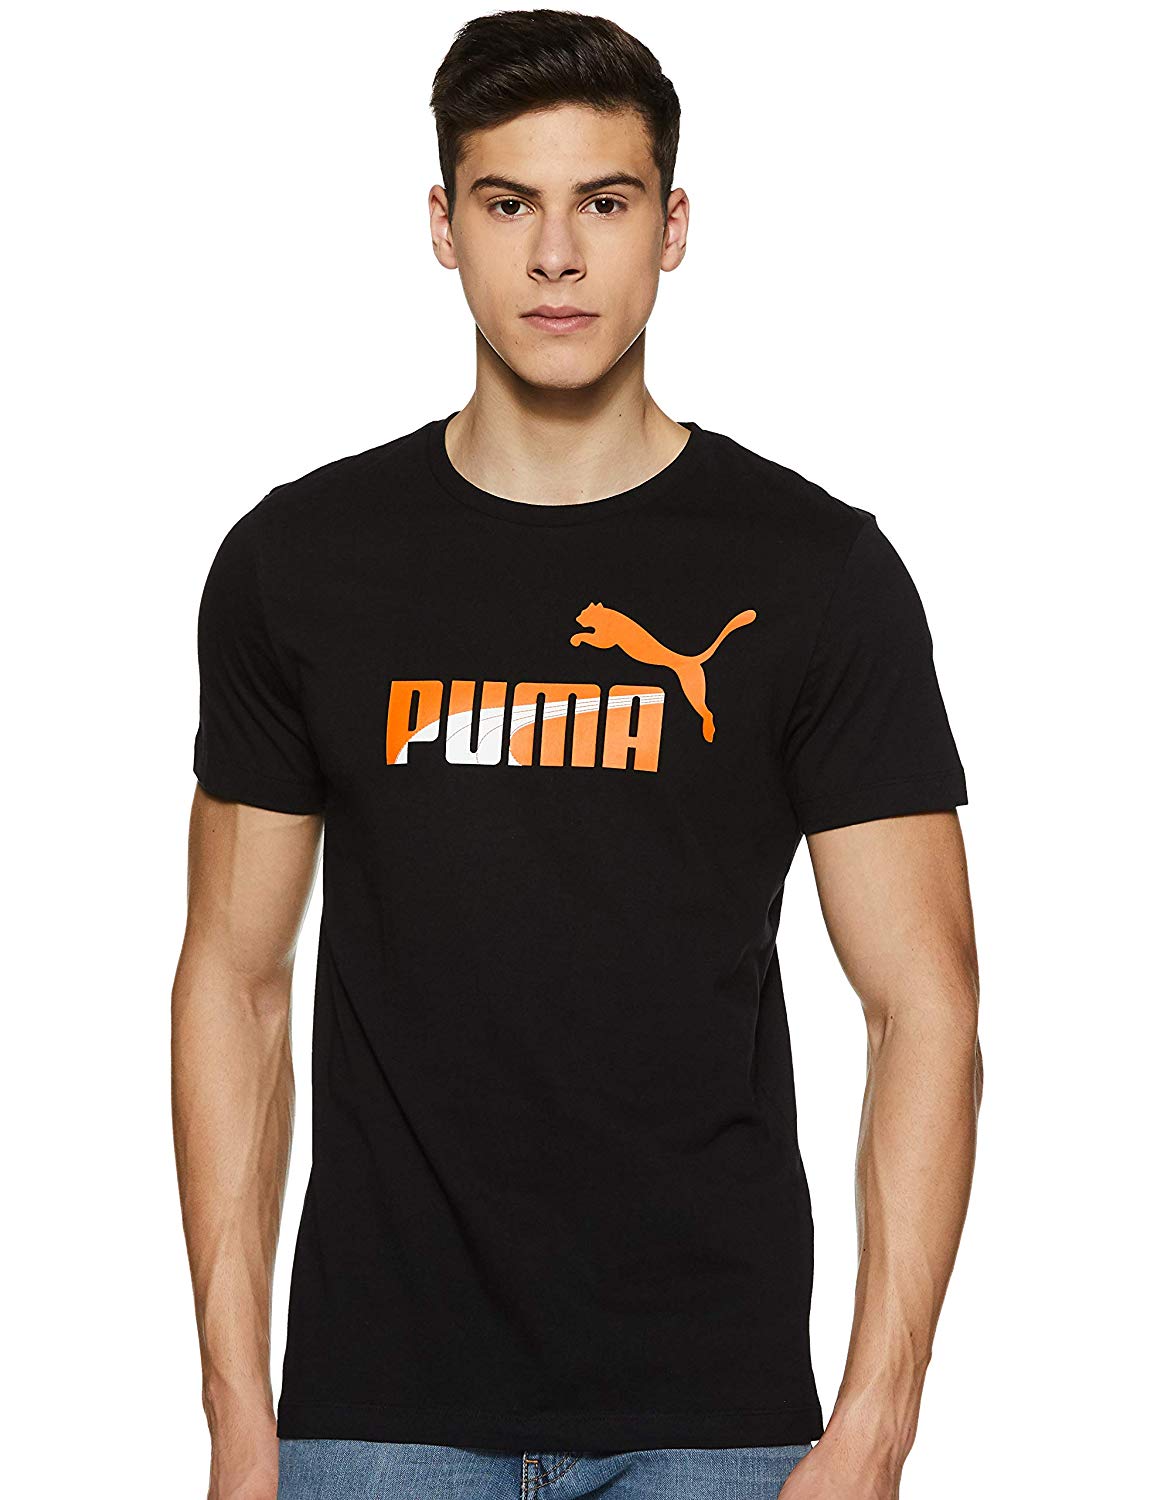 Explore Your Sensual Side with Puma T-Shirts for Men